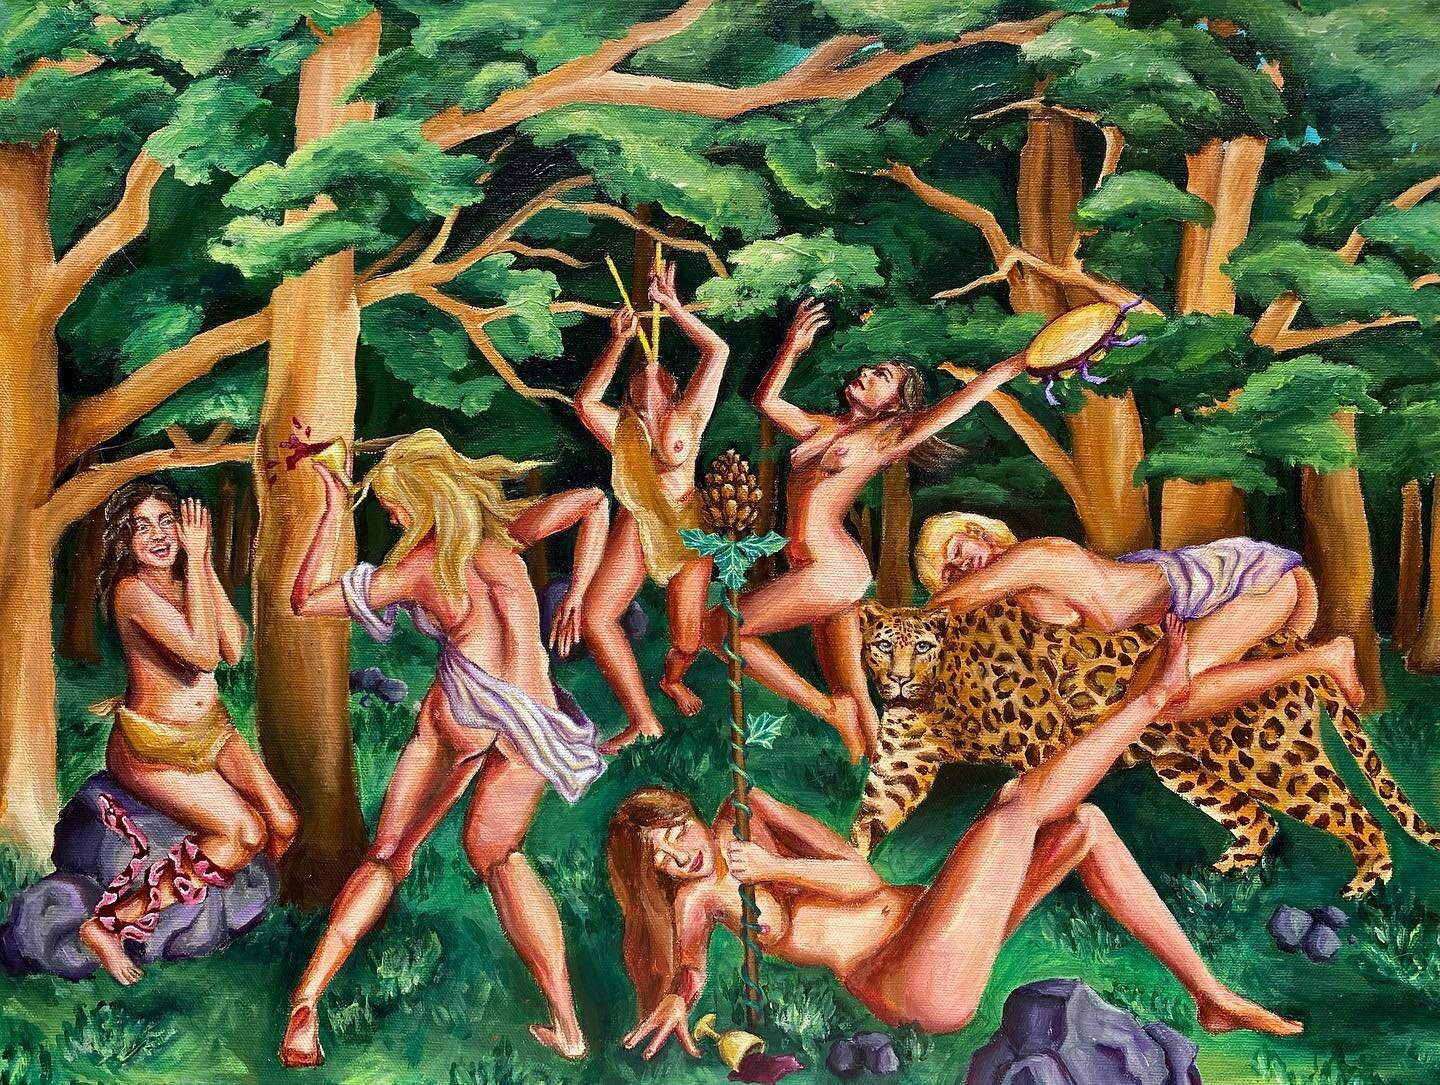 BIG REVEAL:
🏺The Maenads🏺
Female worshippers of the cult of Dionysus, Greek god of wine, pleasure and festivity. According to legend these baddies regularly trekked naked up the mountains, unaffected by the elements, to play music, dance wildly and